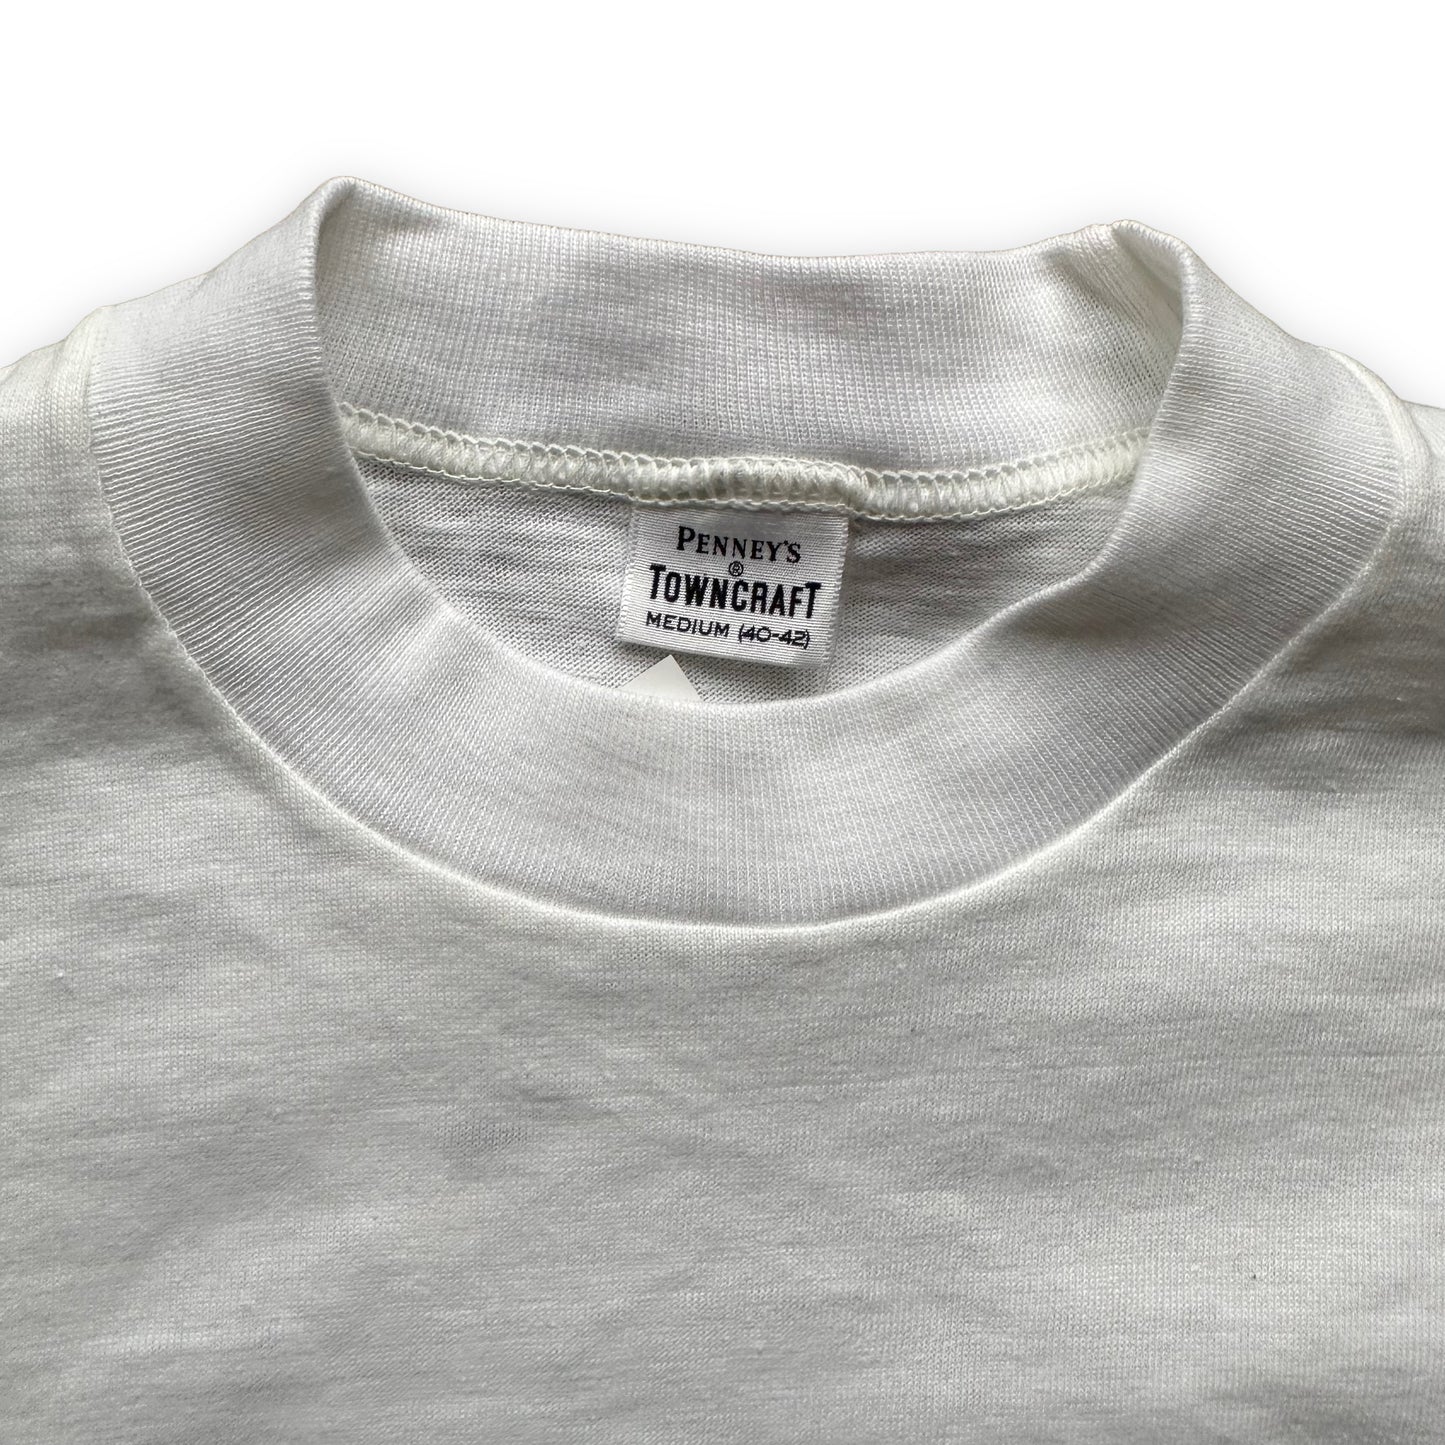 Tag View on Vintage NWT Penneys Towncraft Tee Shirt SZ M | Vintage Blank Tees Seattle | Vintage T-Shirts Seattle